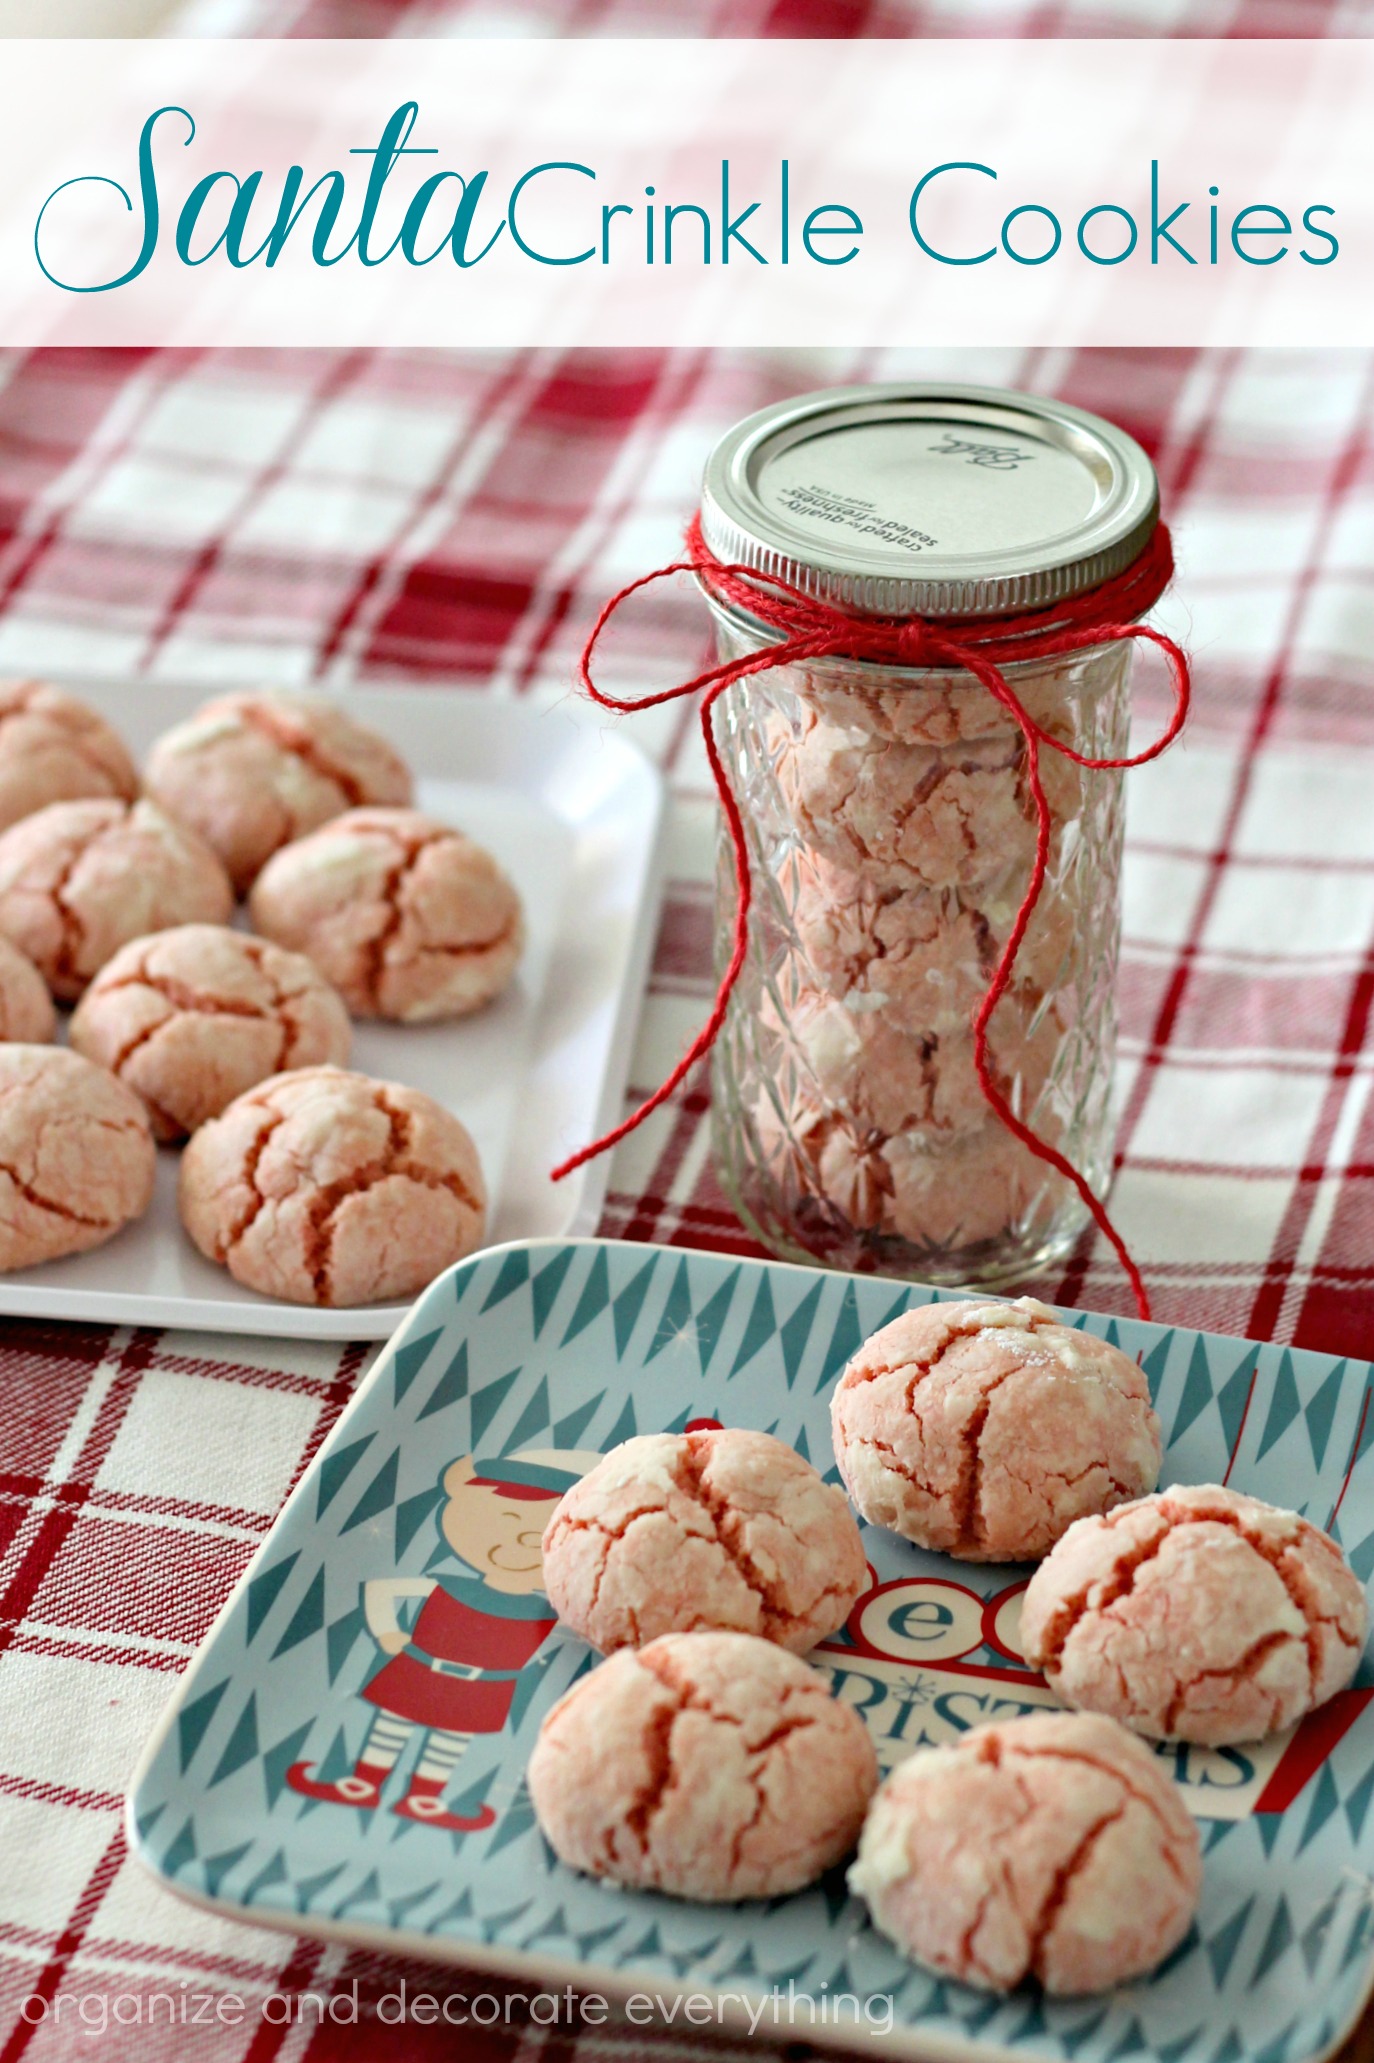 Santa Crinkle Cookies - Organize and Decorate Everything